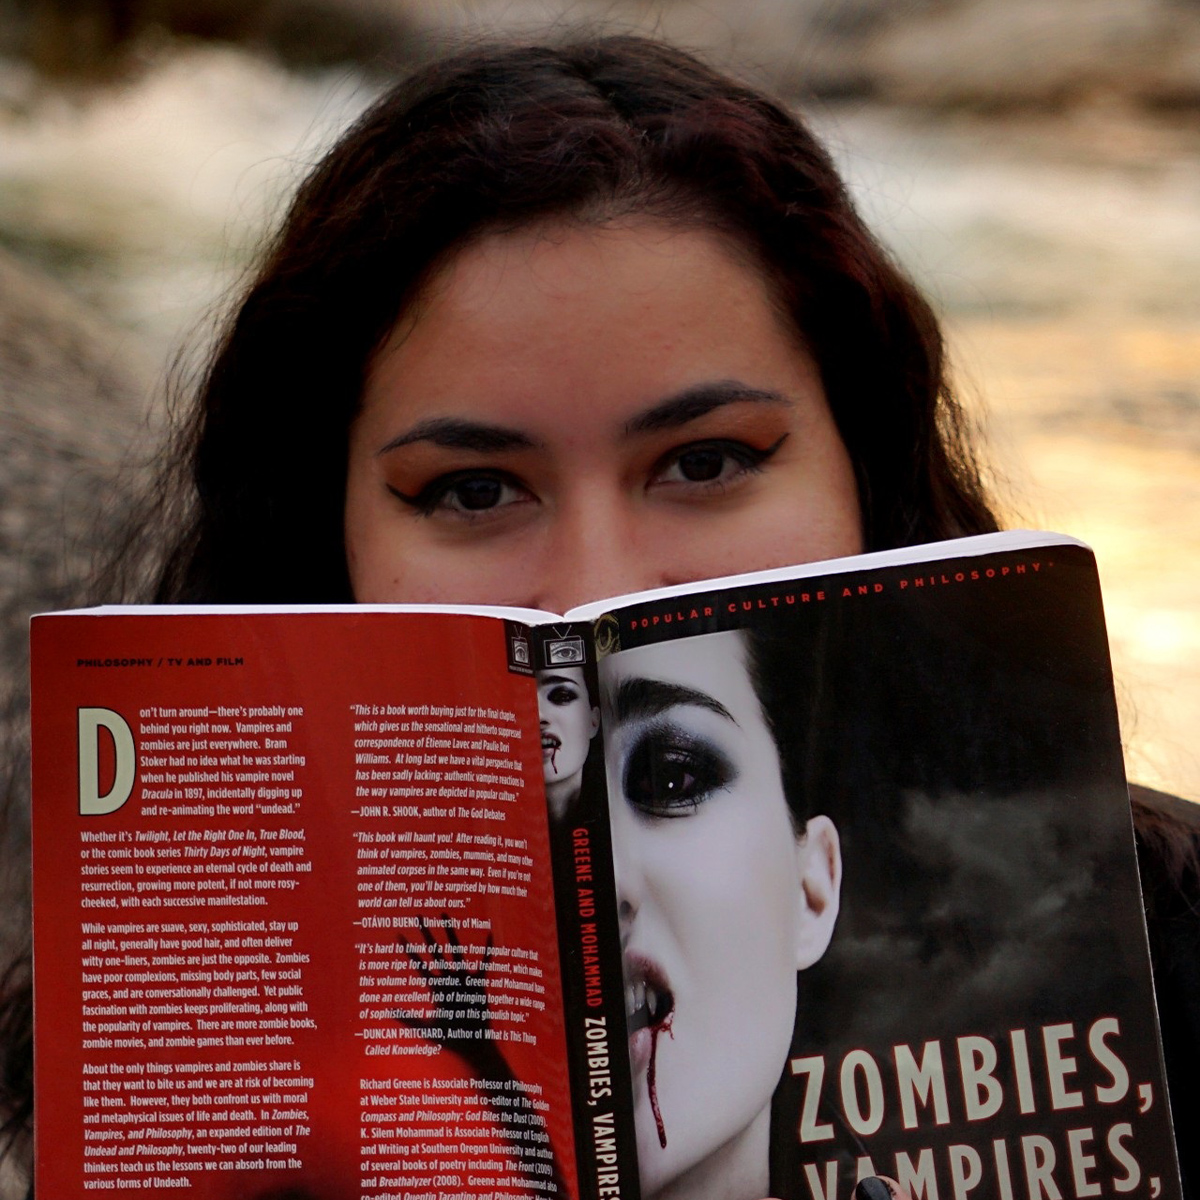 Chicana holding a book in front of the lower half of their face. They are wearing a black t-shirt with a Halloween jack o'lantern design, and have on orange eye shadow with black eyeliner make-up. The book is titled "Zombies, Vampires, and Philosophy" and there is a blurred river in the background.